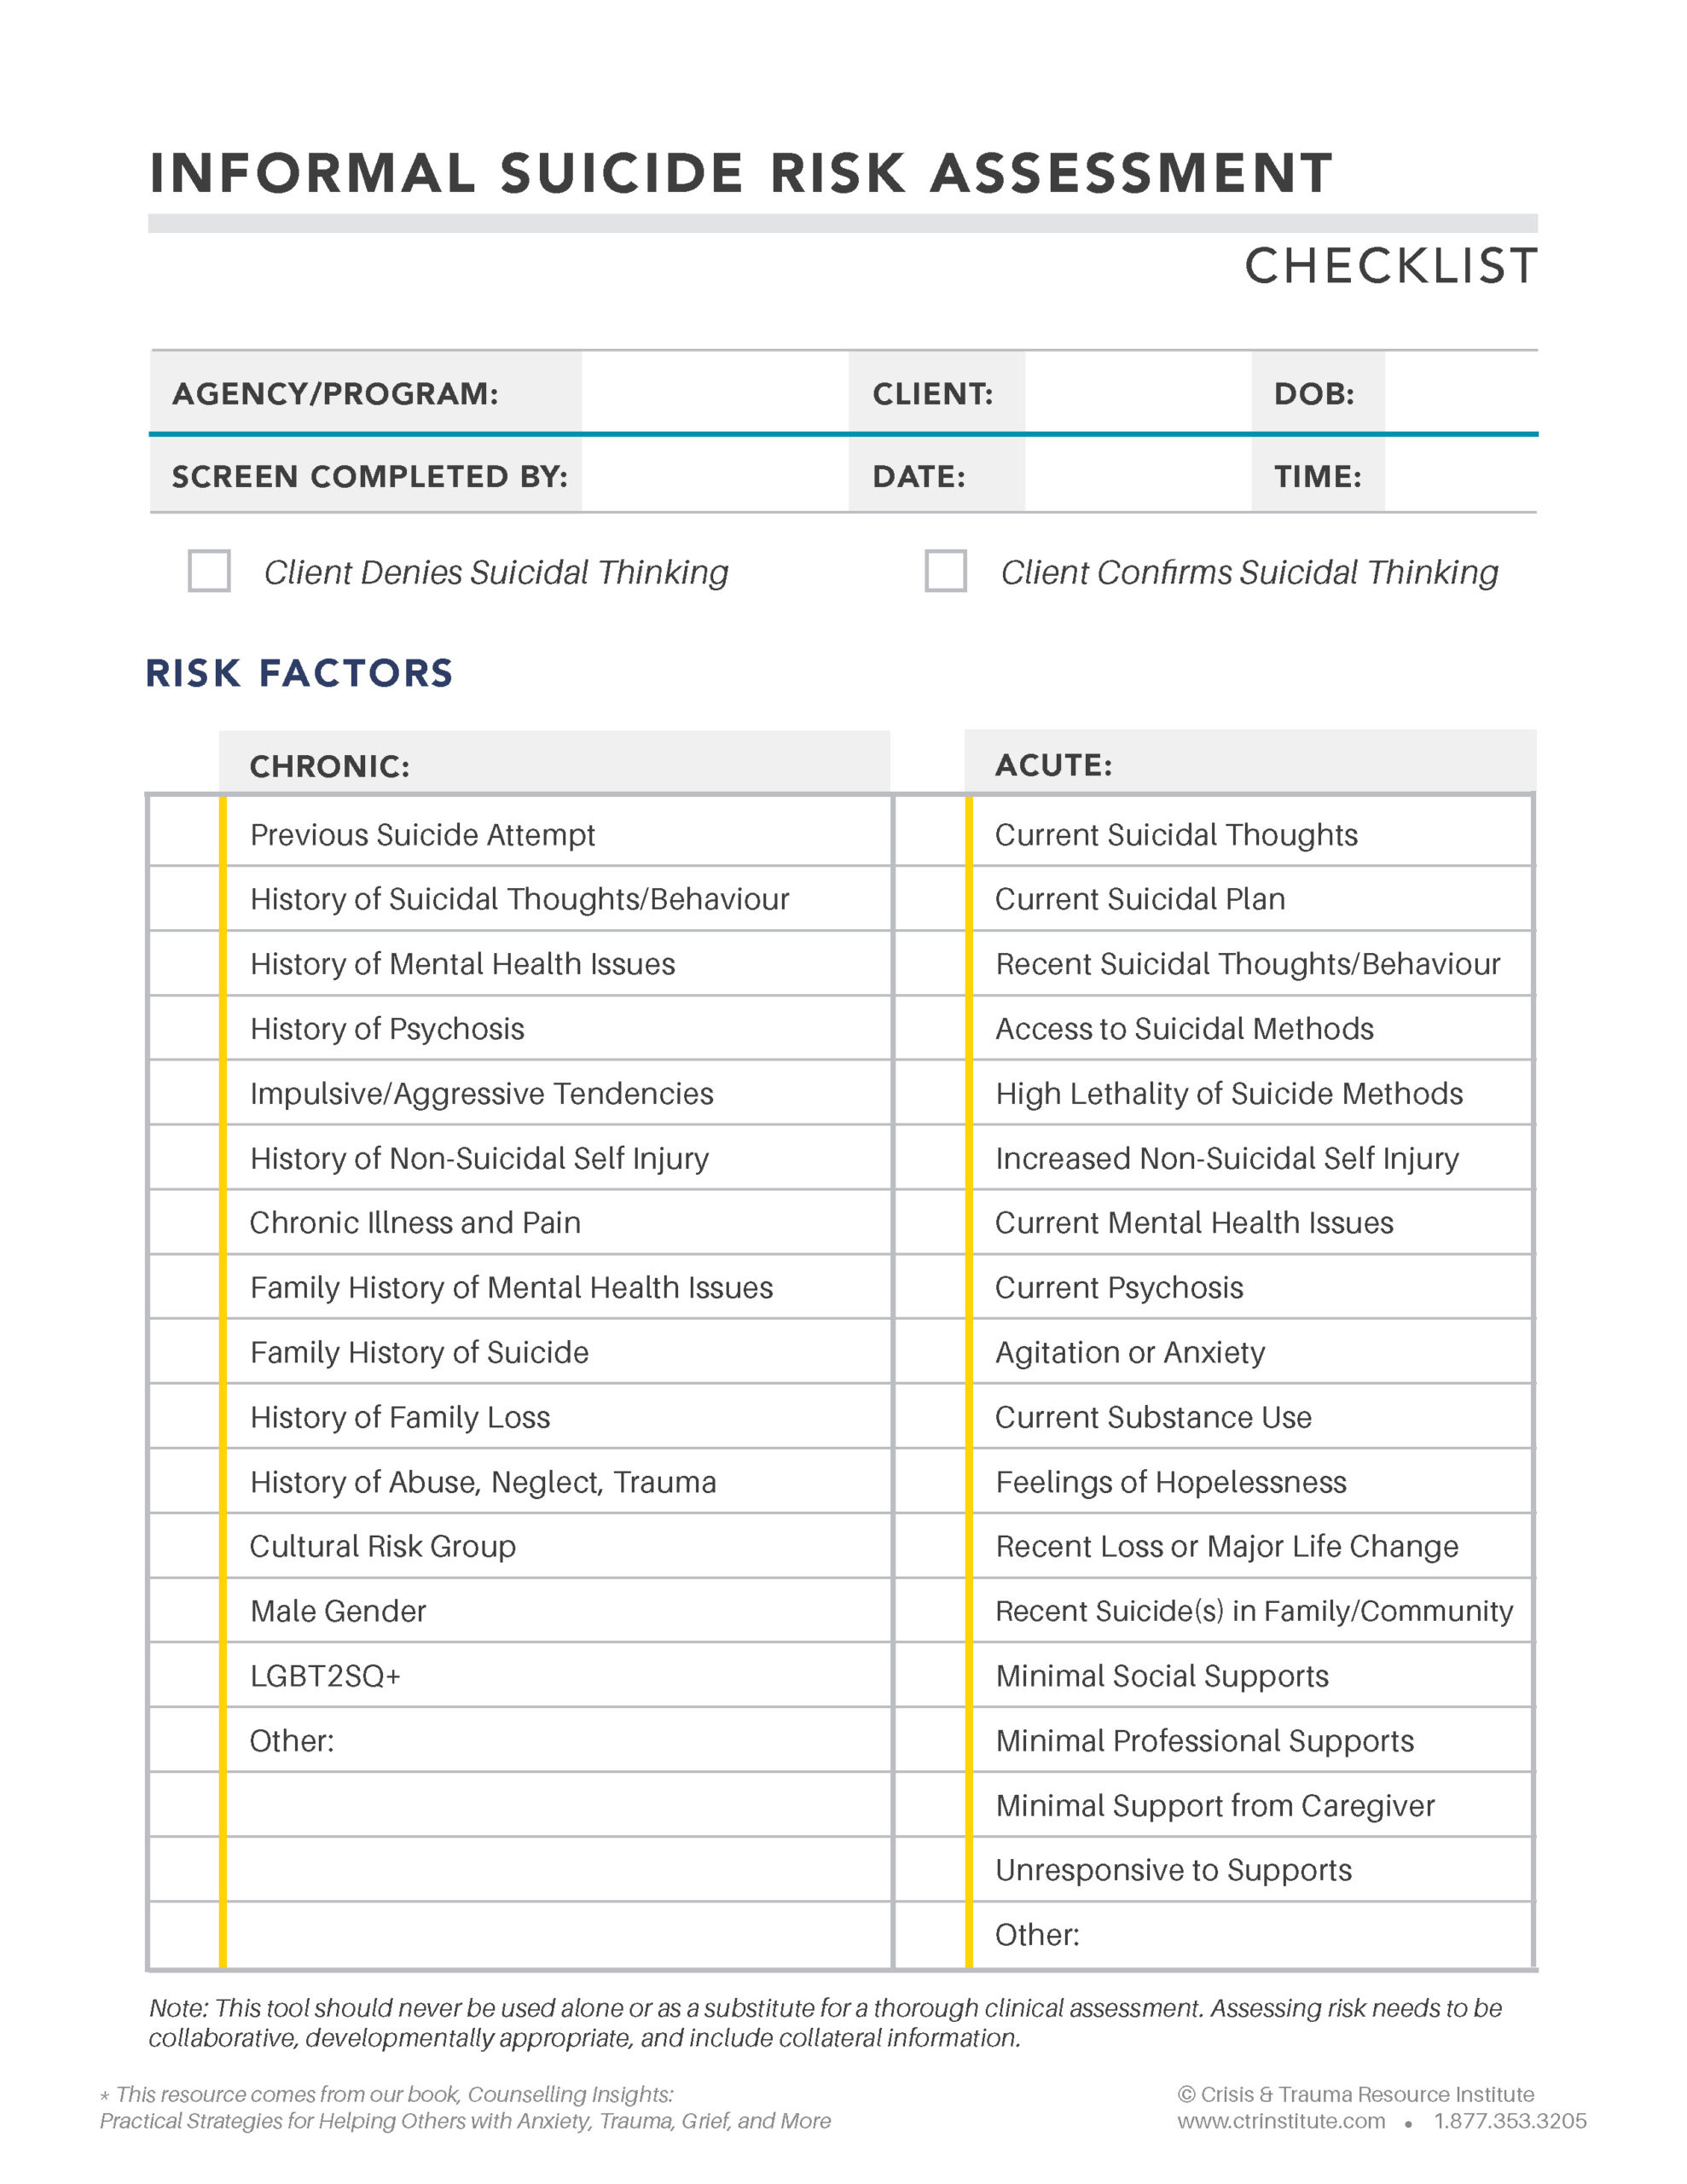 Informal Suicide Risk Assessment Checklist  Crisis and Trauma  Throughout Risk Assessment Checklist Template With Risk Assessment Checklist Template